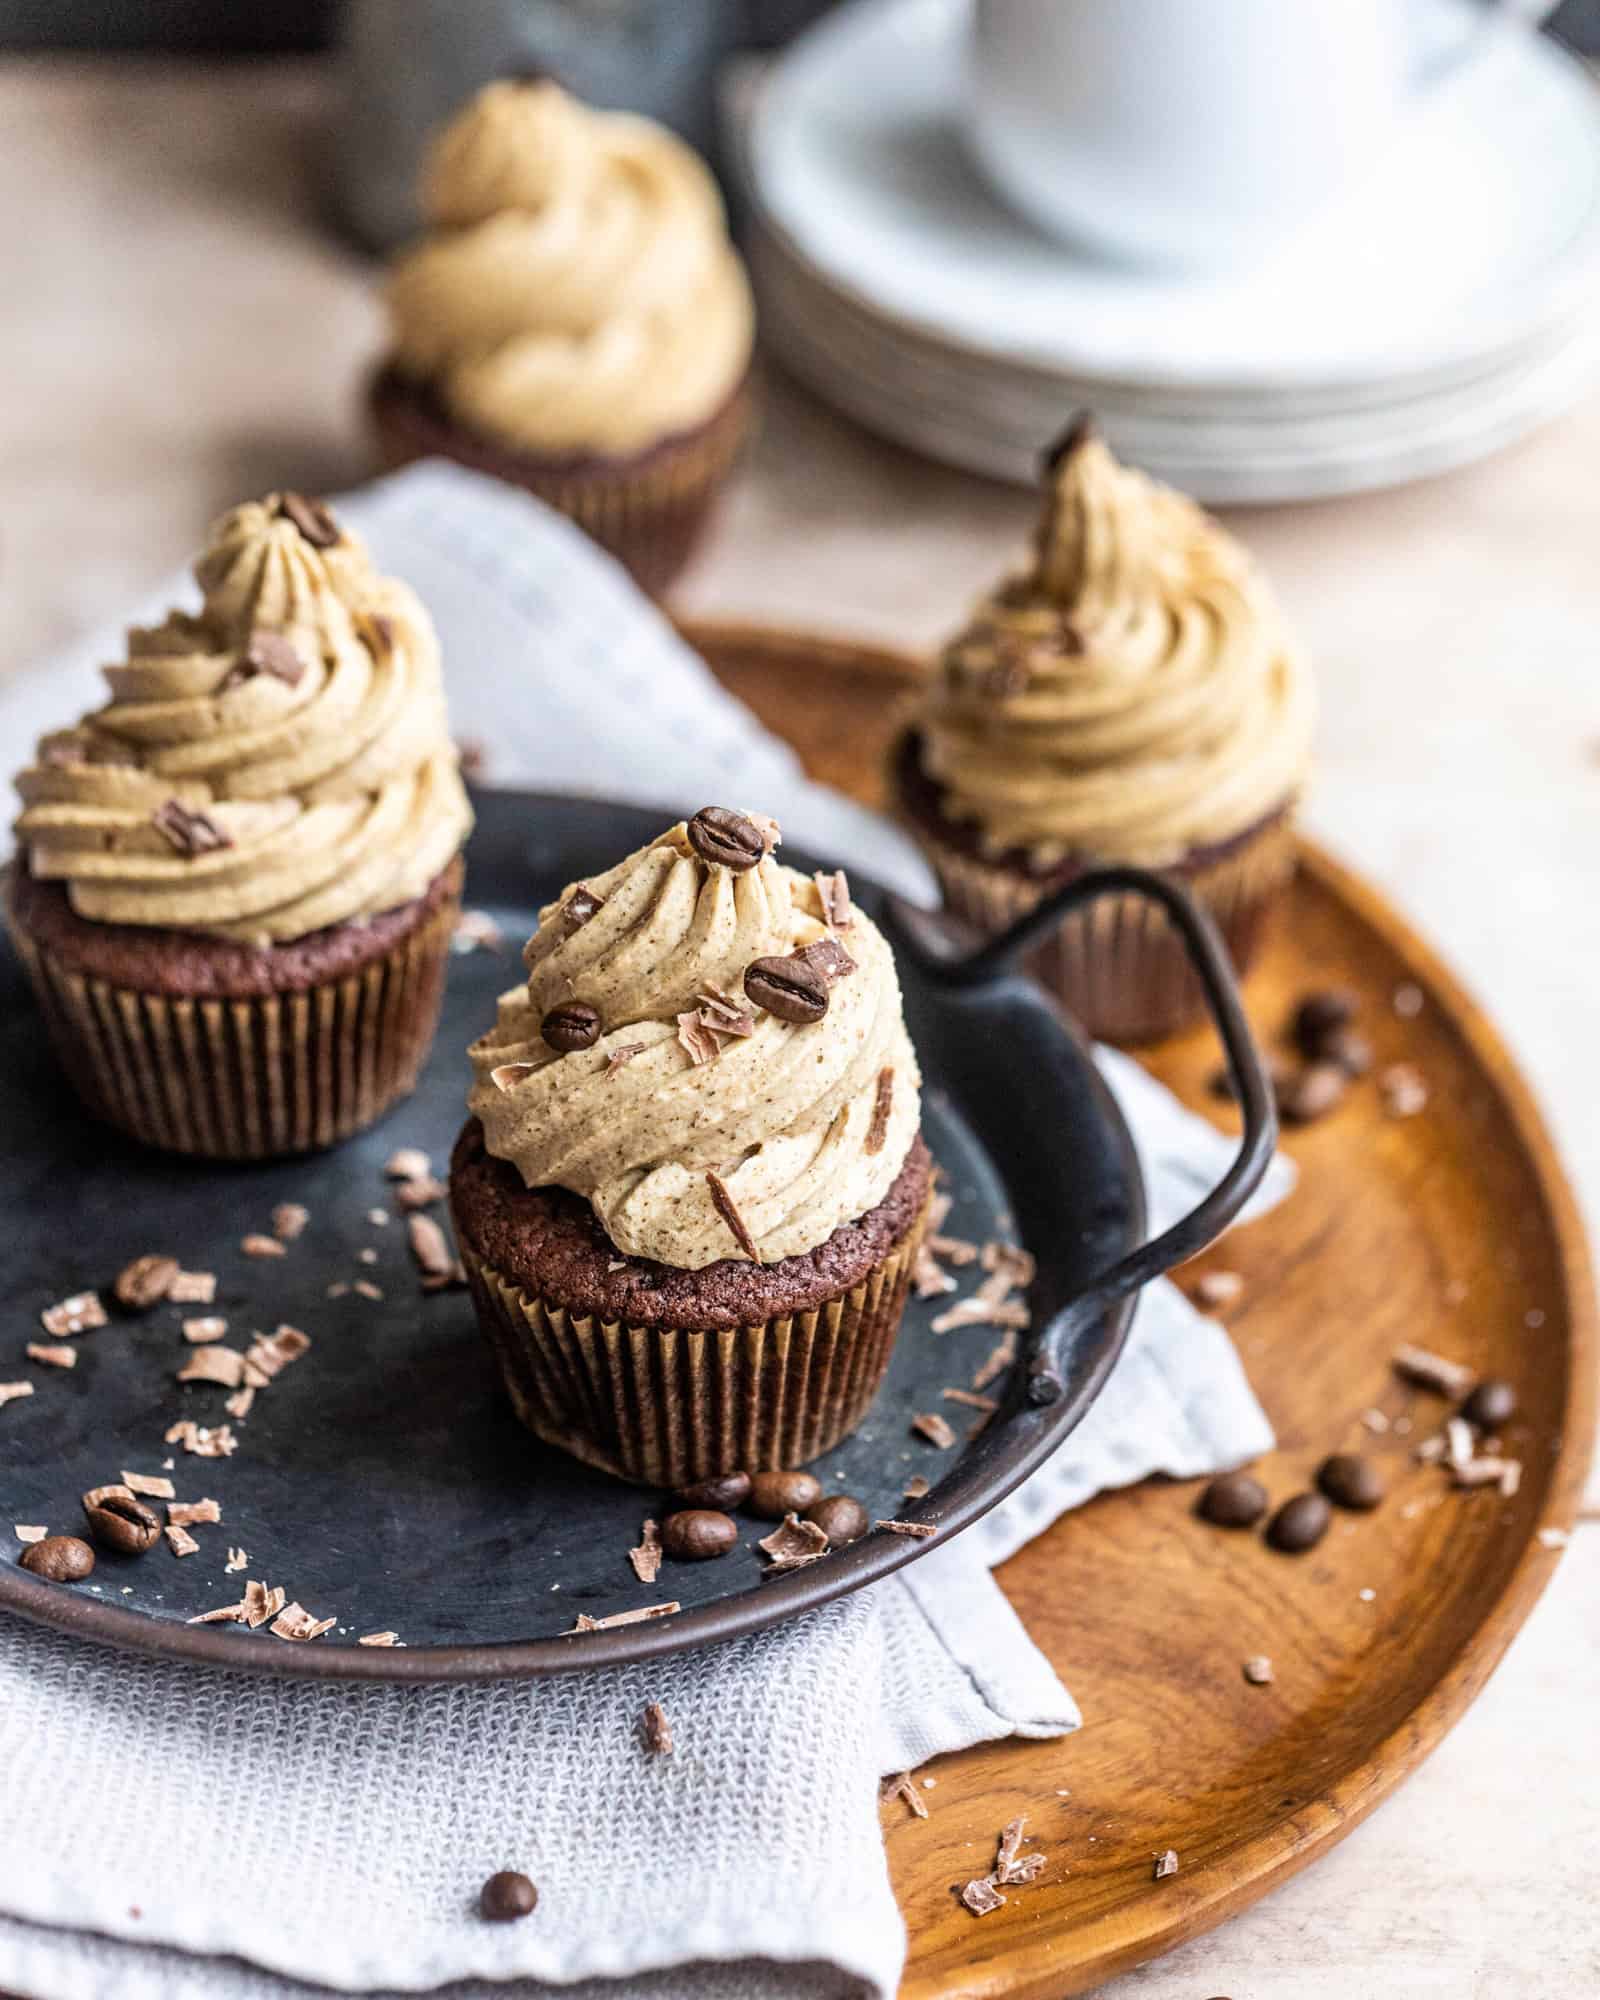 cupcakes on a wooden plates